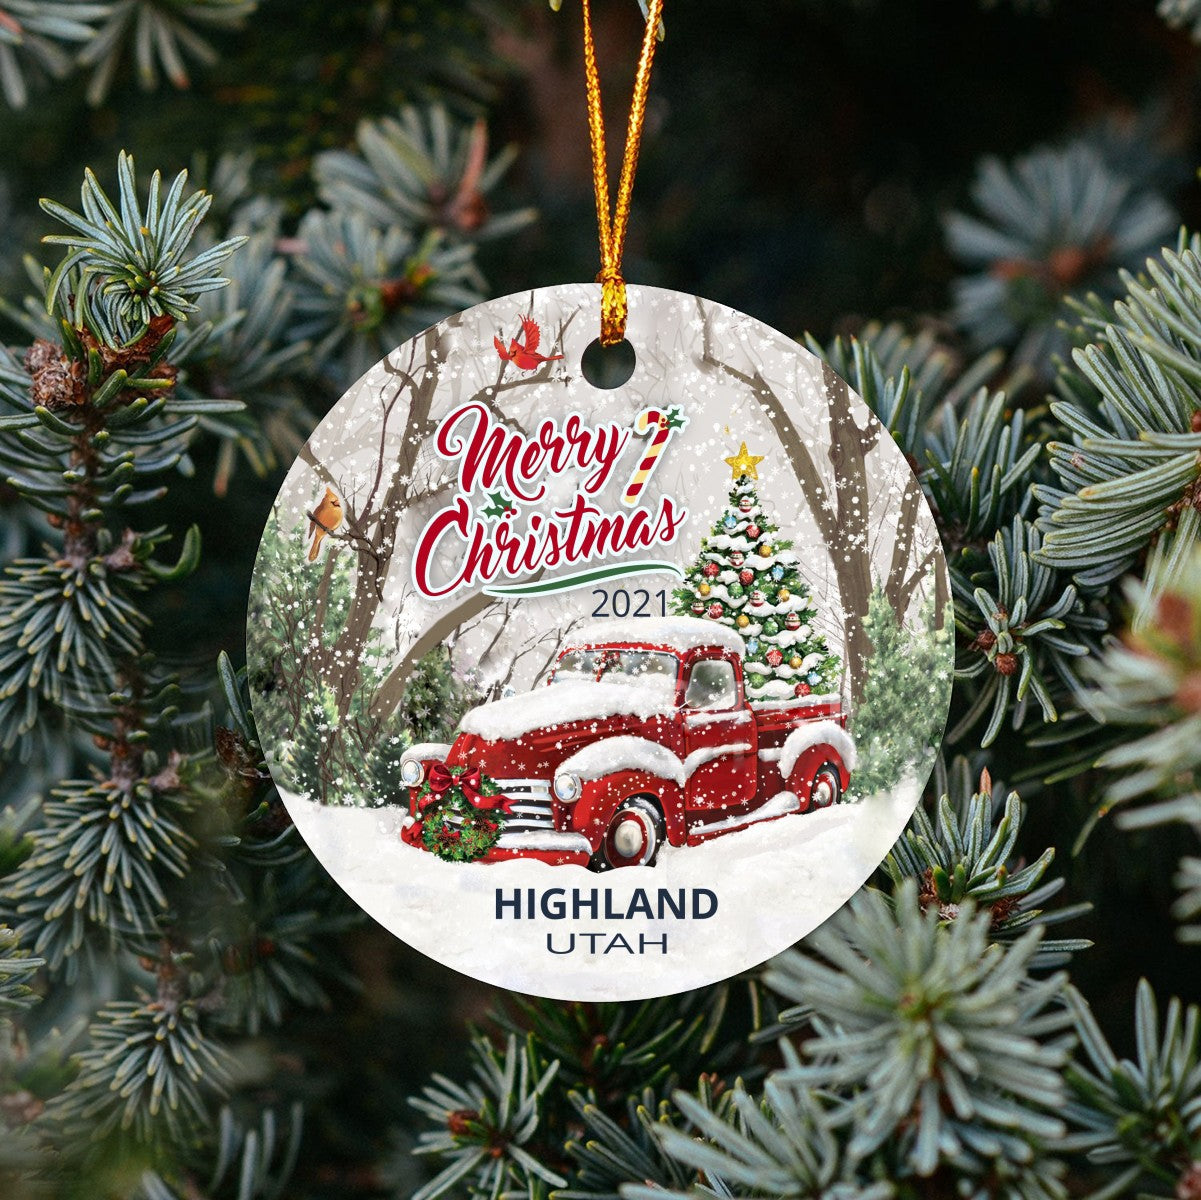 Christmas Tree Ornaments Highland - Ornament With Name City, State Highland Utah UT Ornament - Red Truck Xmas Ornaments 3'' Plastic Gift For Family, Friend And Housewarming